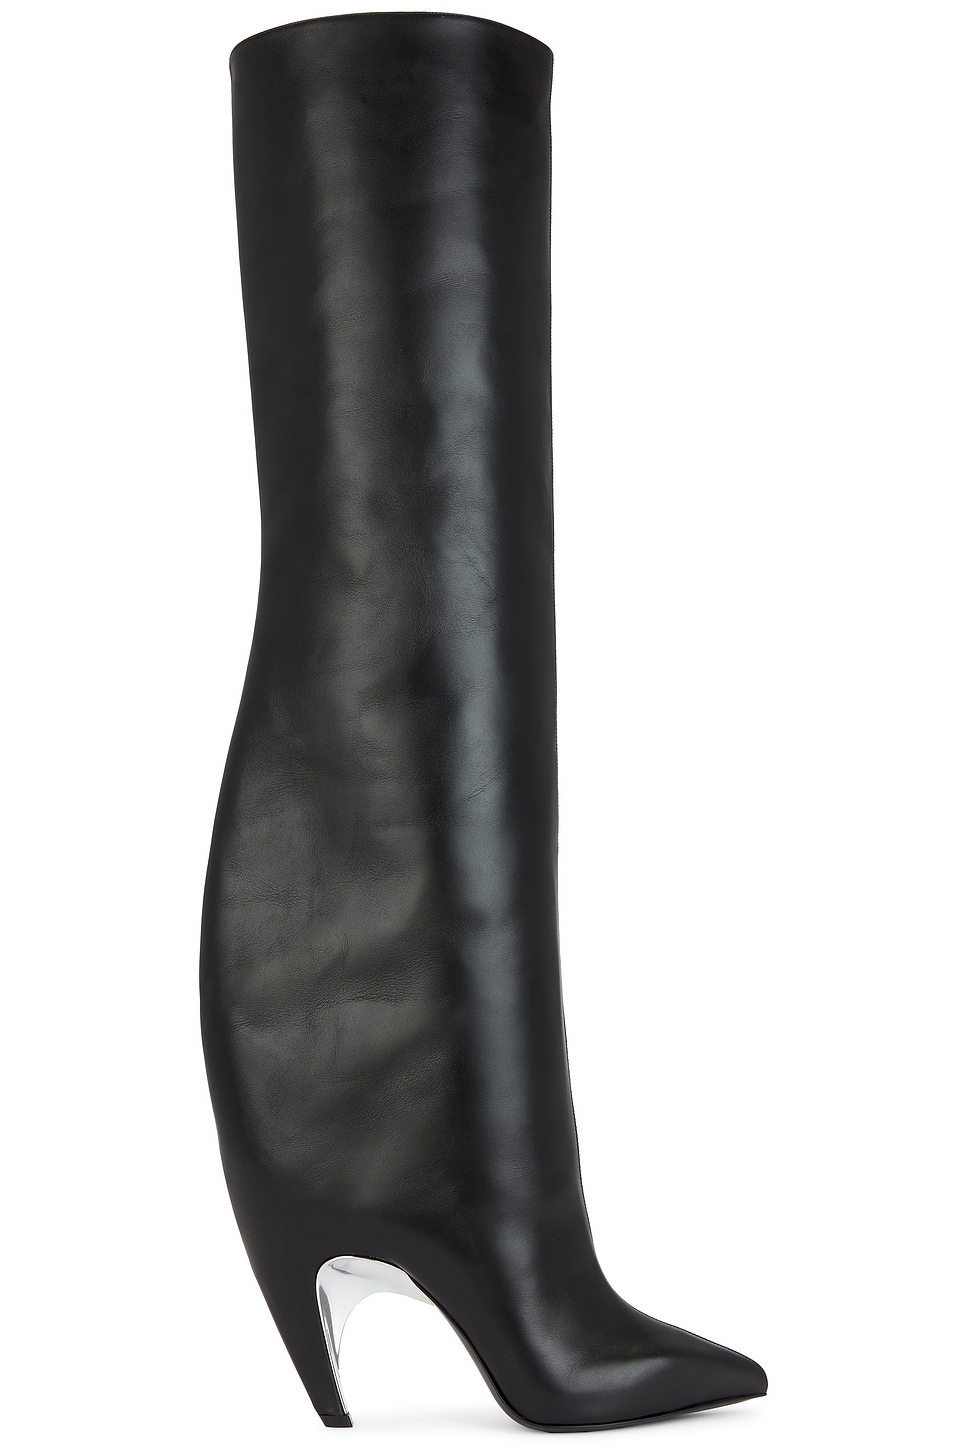 Image 1 of Alexander McQueen Tall Boot in Black & Silver